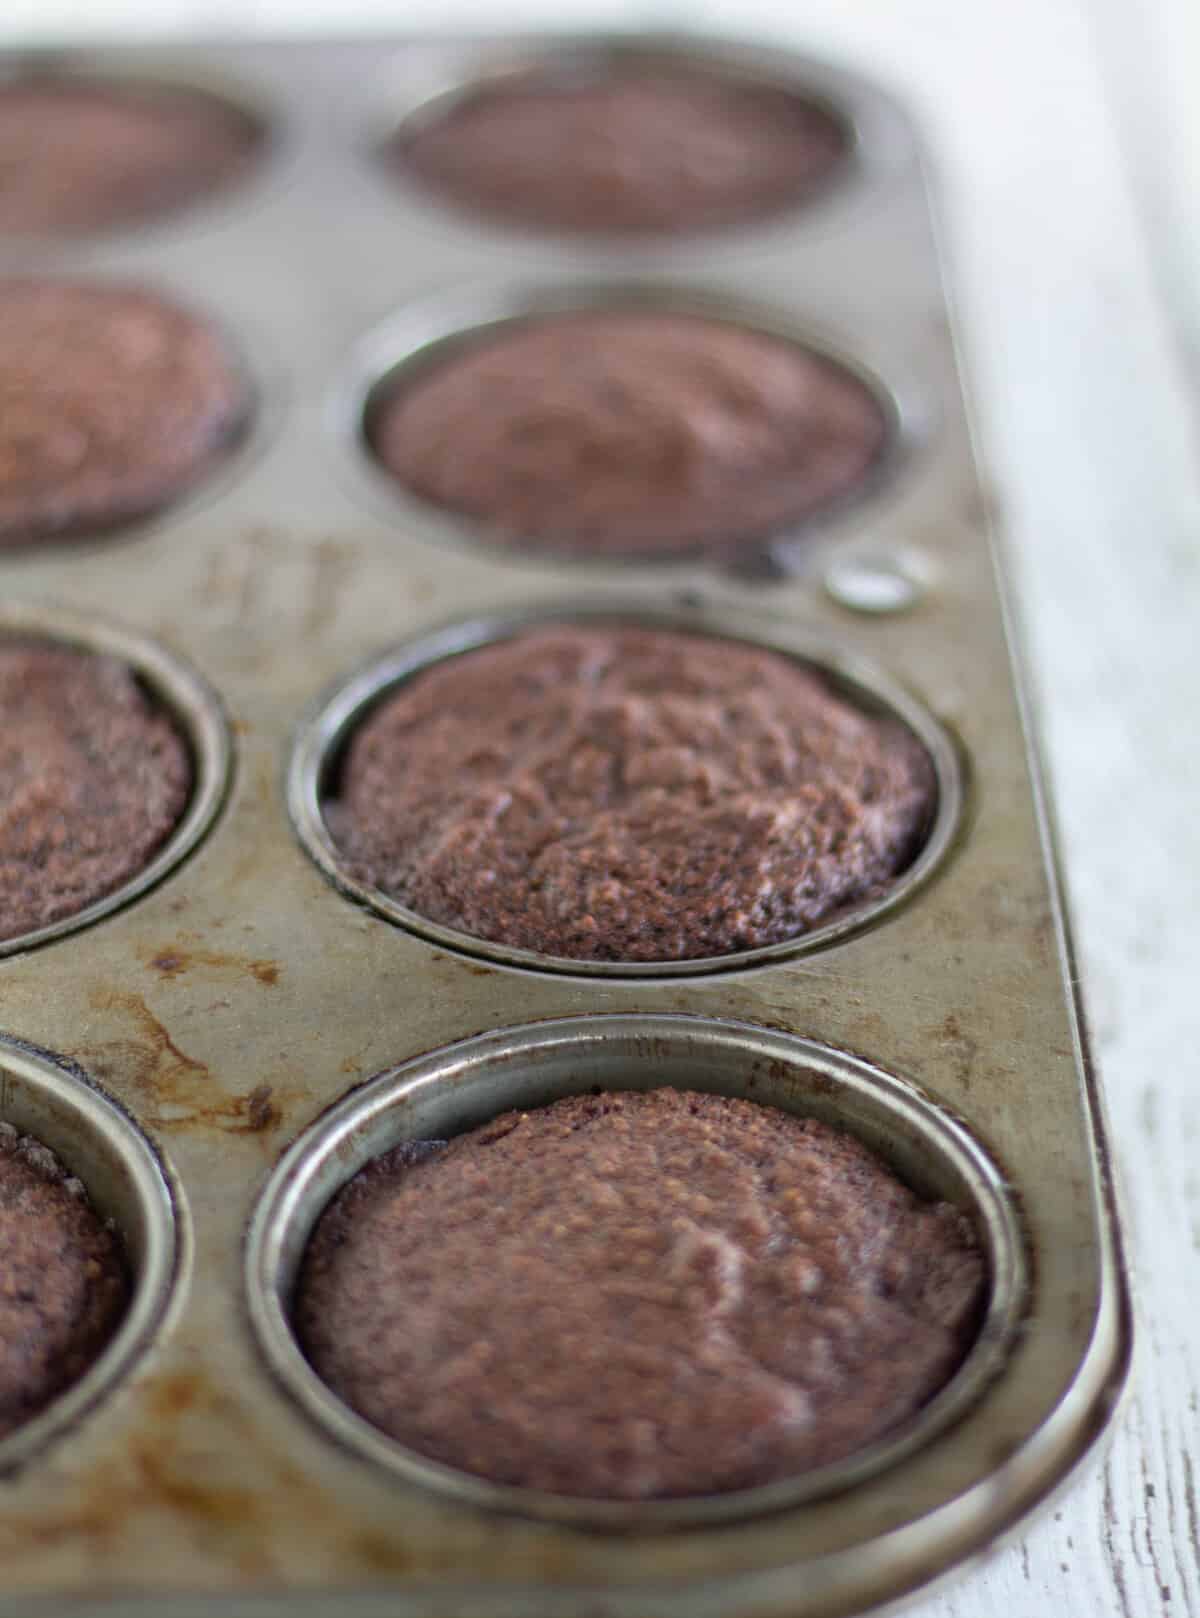 baked cupcakes in muffin tin.